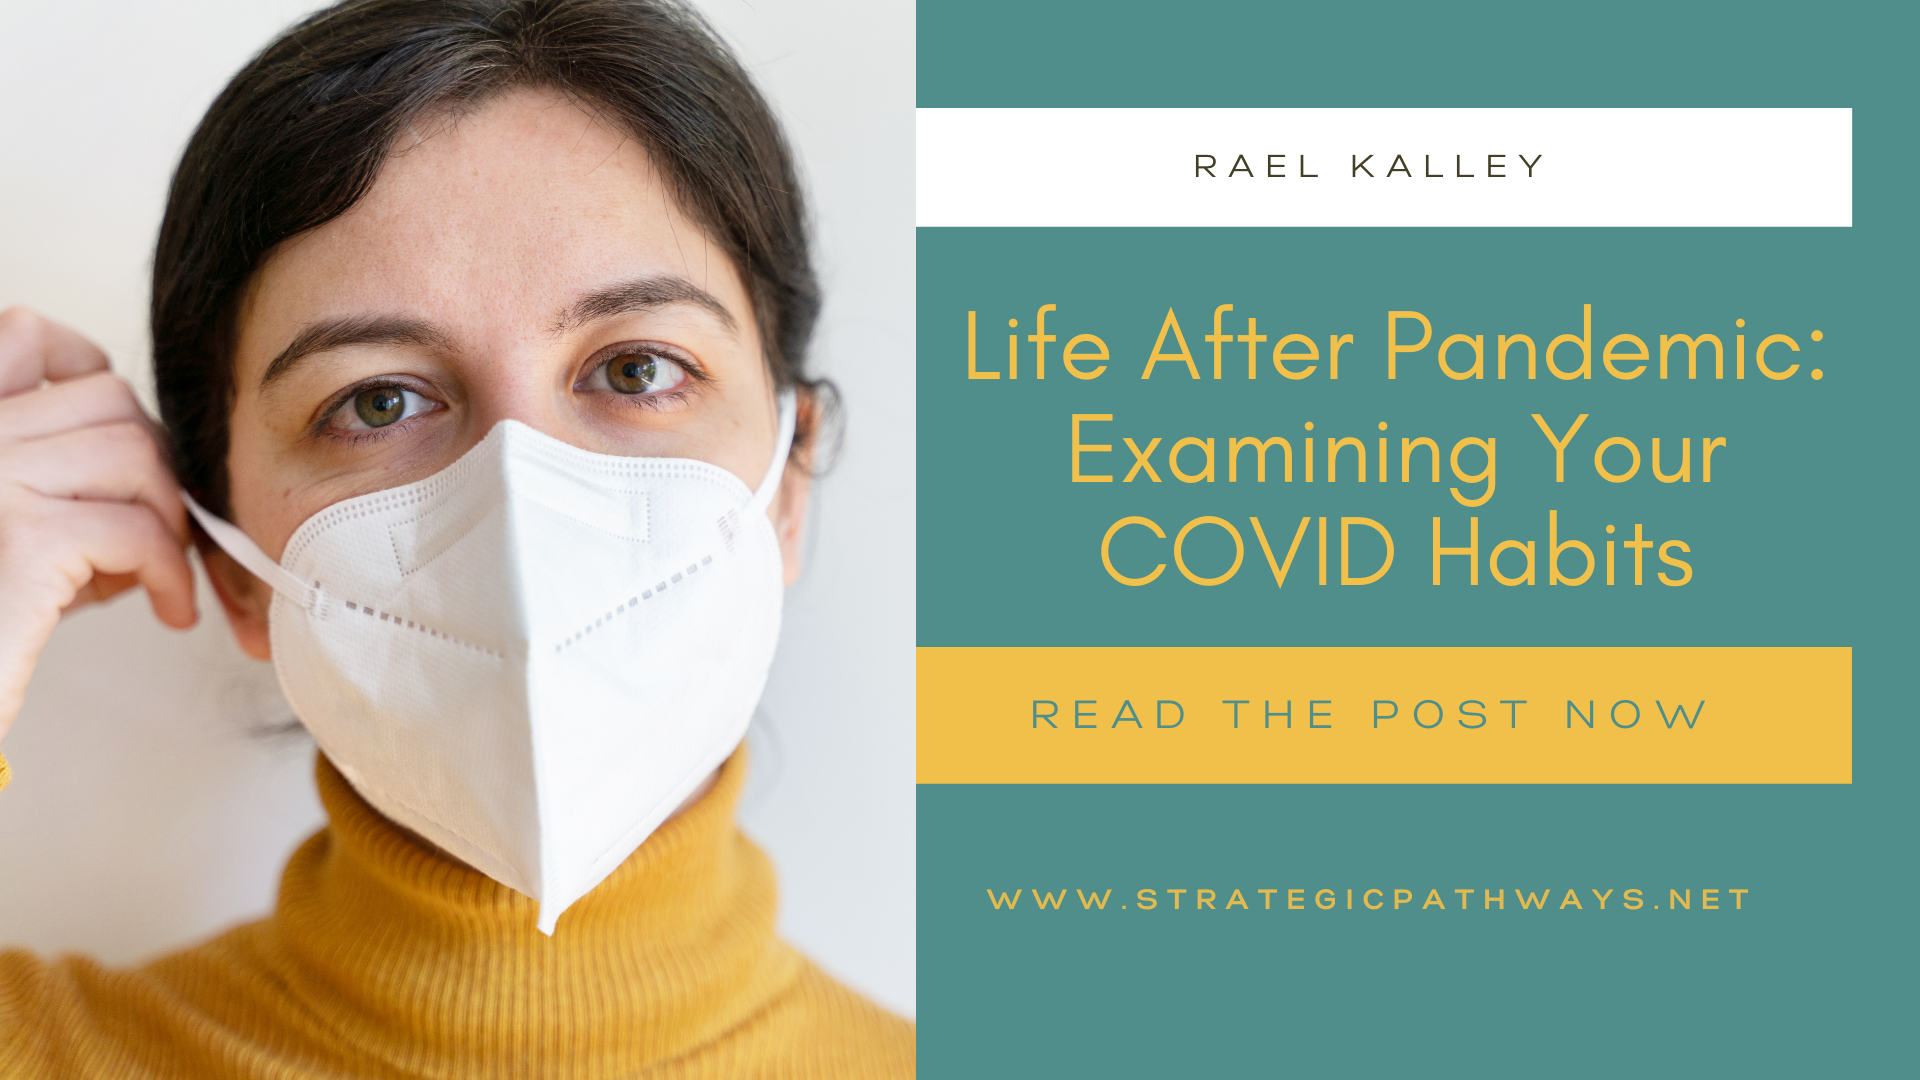 Text says "Life After Pandemic: Examining Your COVID Habits" and image is a woman wearing a yellow sweater and a face mask